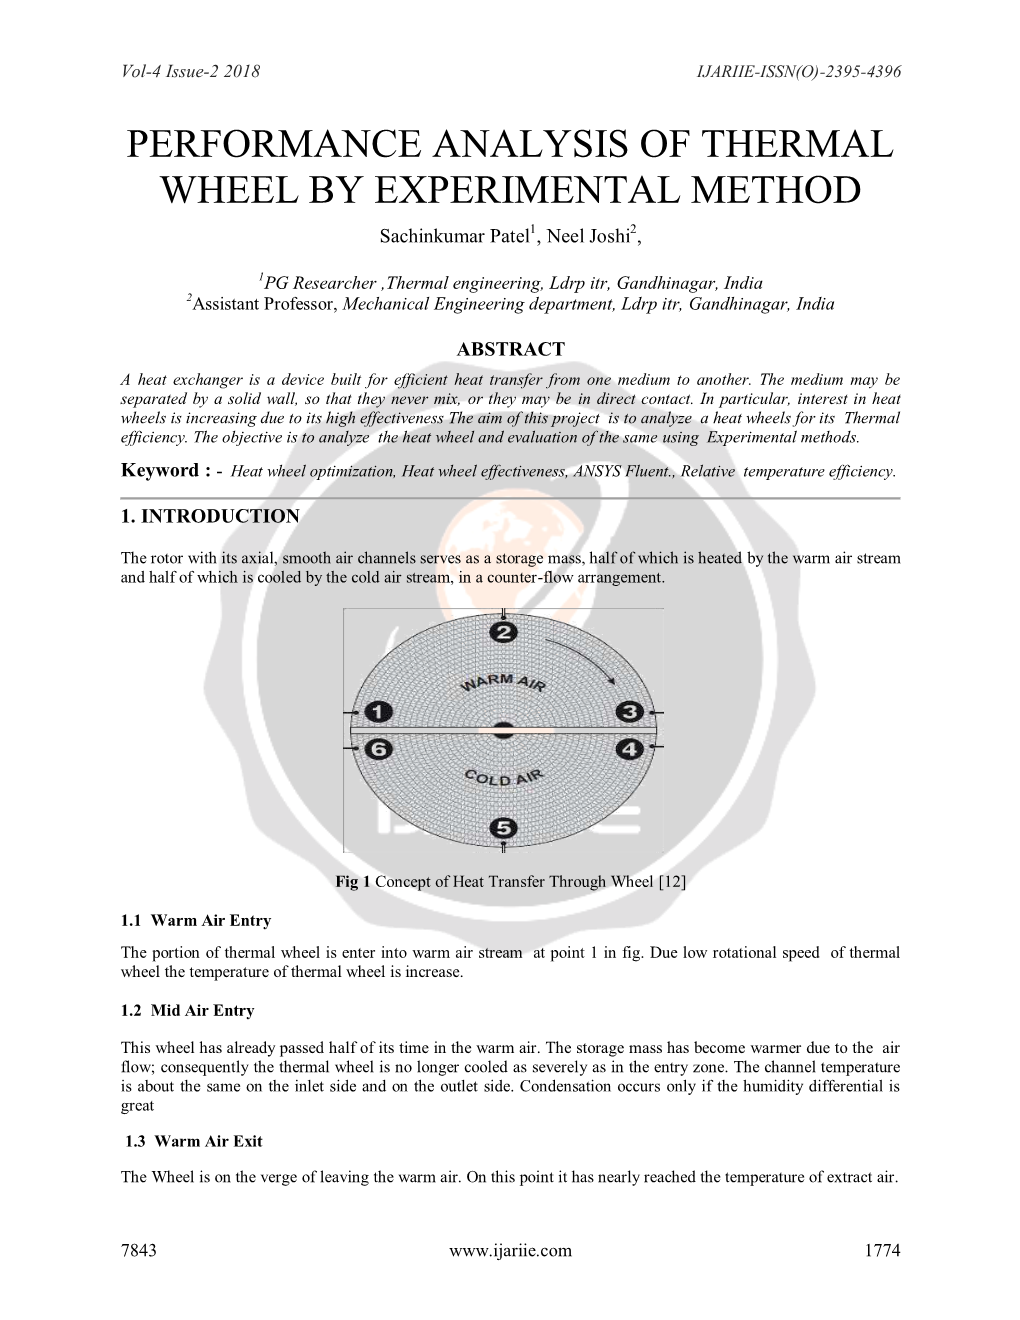 Performance Analysis of Thermal Wheel by Experimental Method